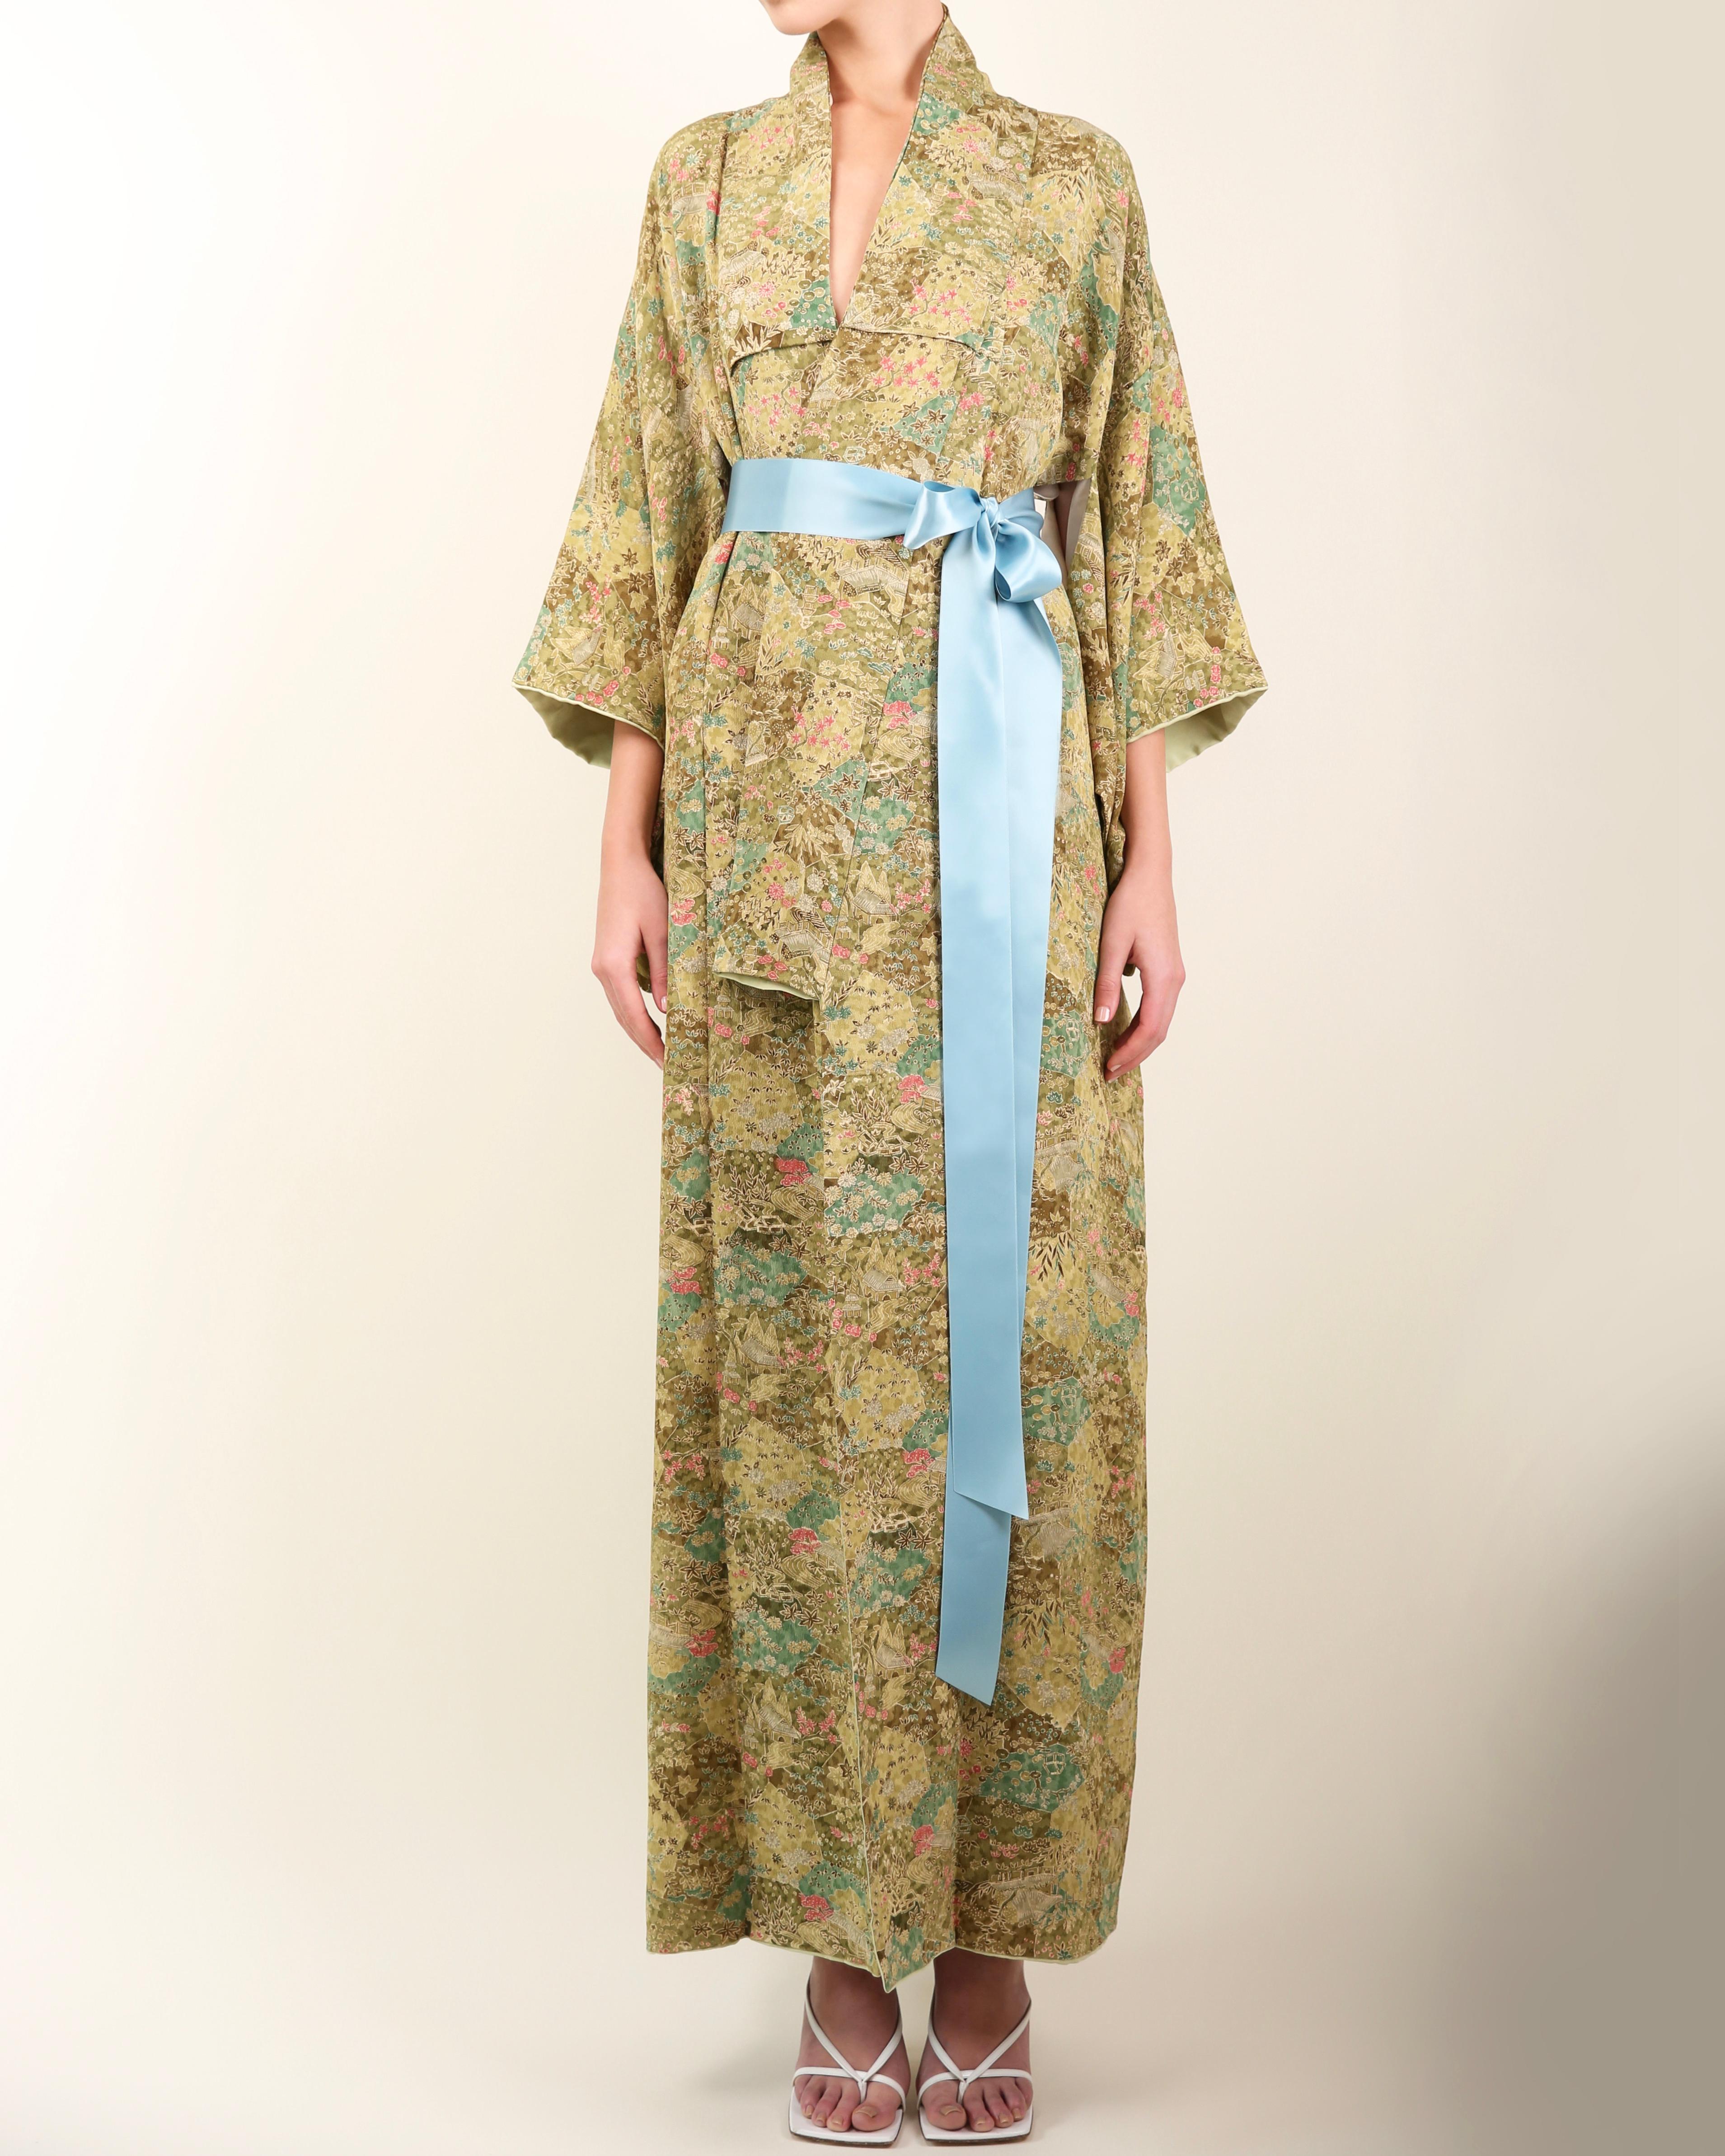 Vintage Japanese kimono
Handmade in Japan 
Floor length
Varying shades of green mixed with pale grey and pink
Floral garden style print
Comes with a bright blue silk ribbon that gives you the option to wear this open or closed 

FREE SHIPPING